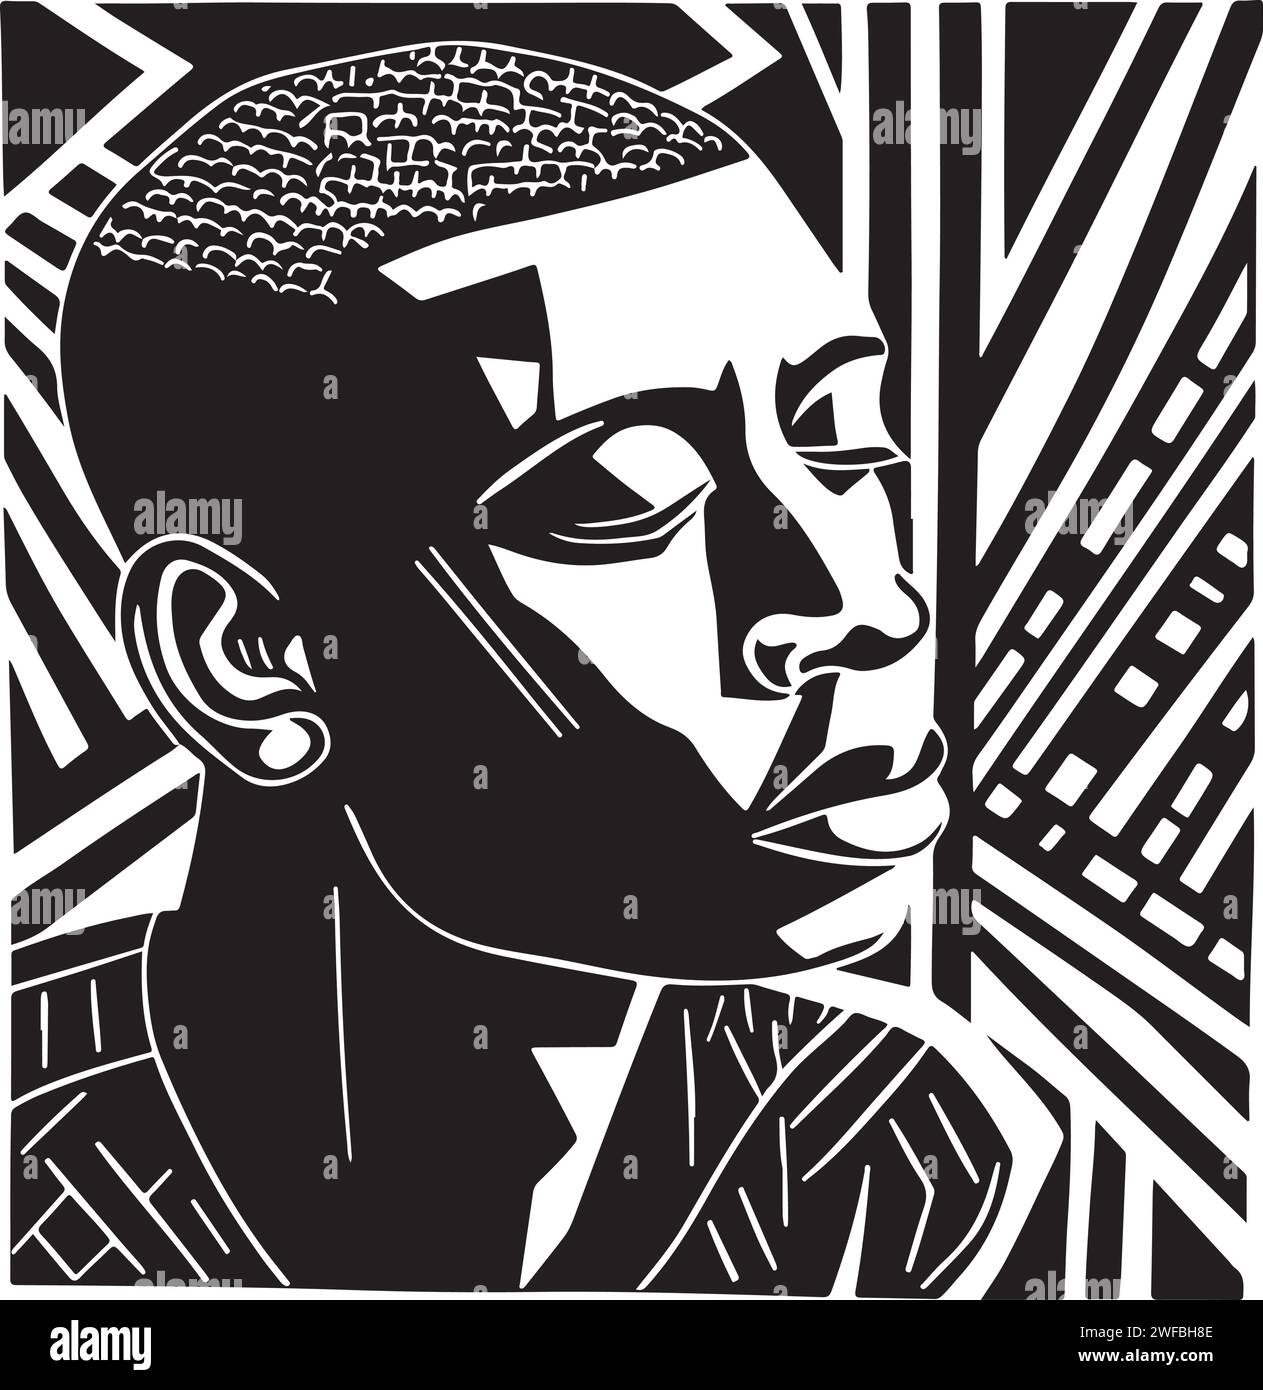 Abstract art vector outline illustration of african man face. Black and white coloring page of human face portrait. Modern print, poster image. Stock Vector